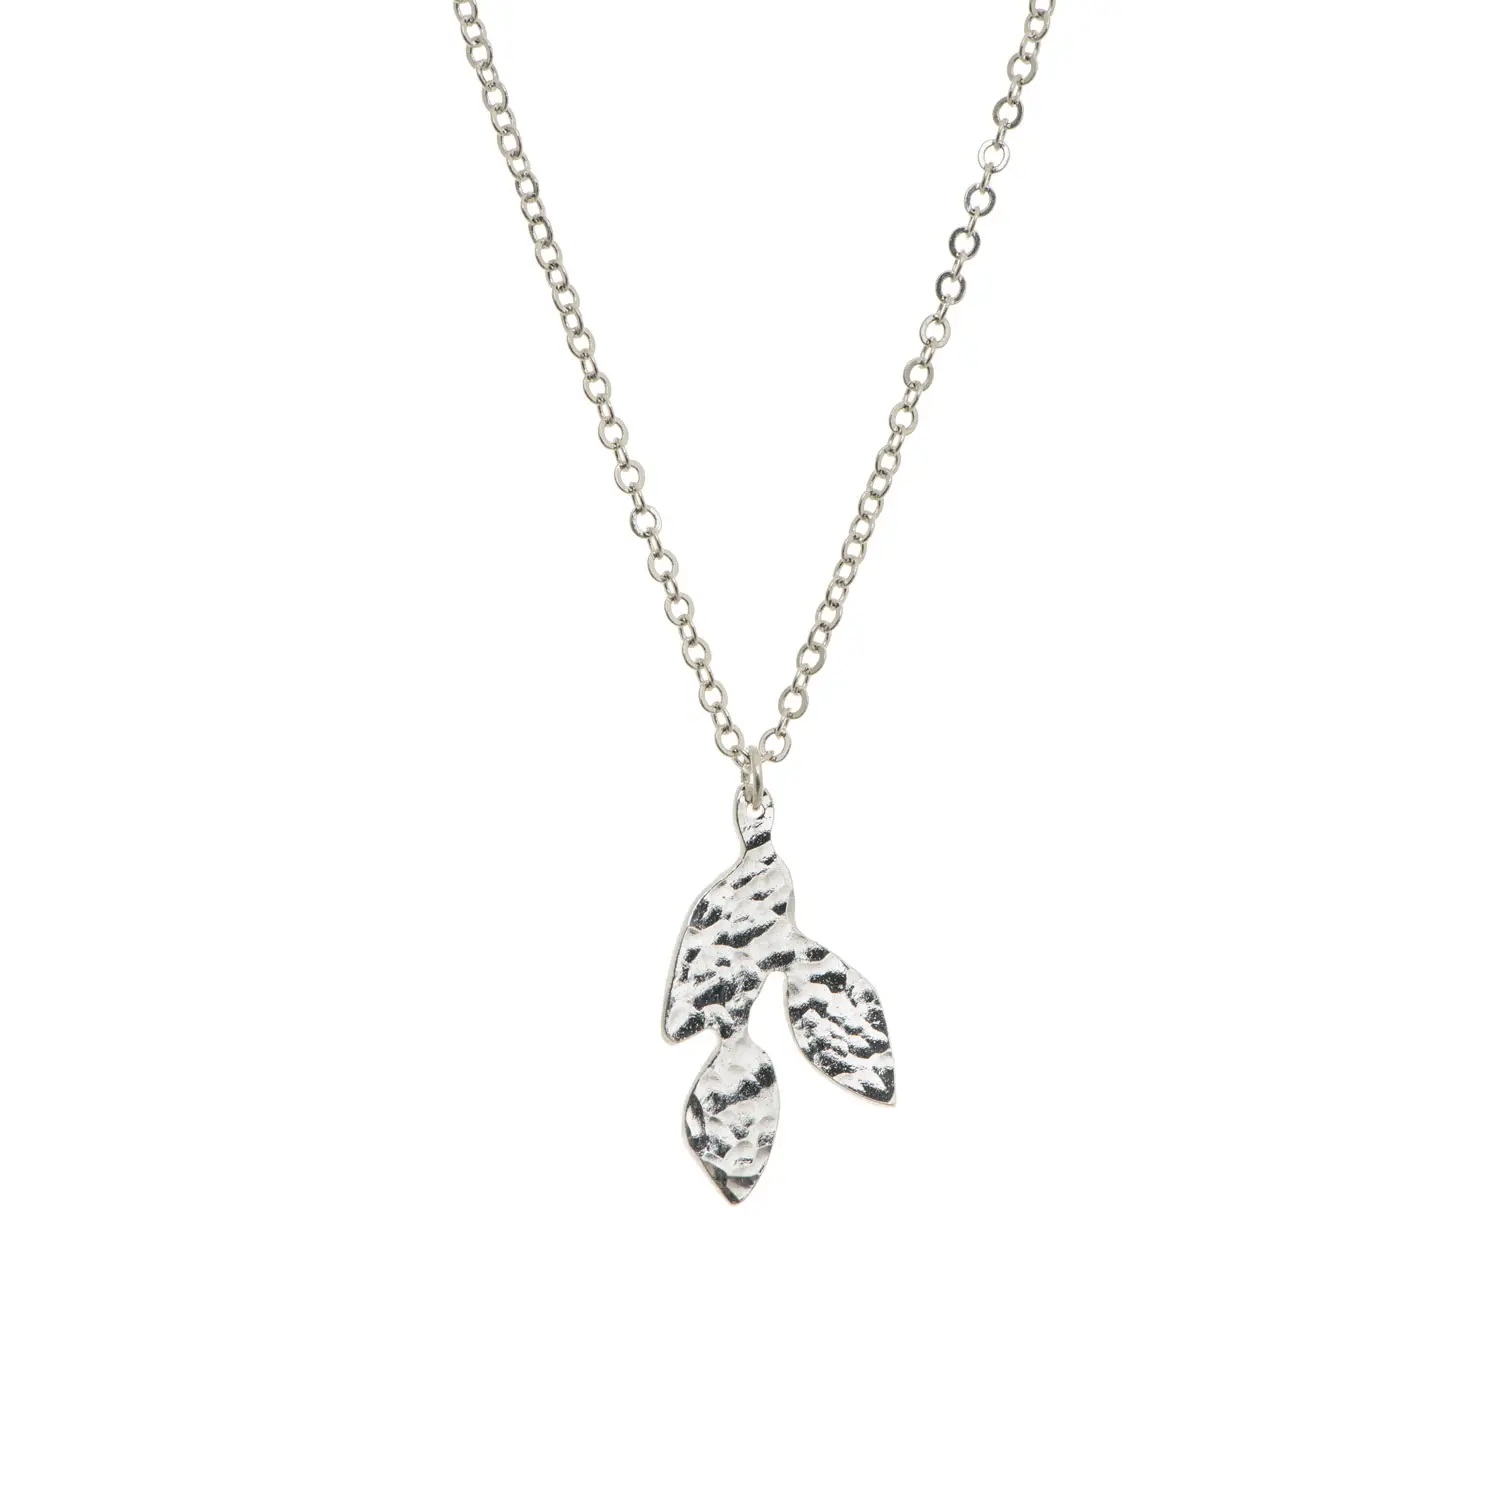 Just Trade  Silver Plated Small Leaf Pendant